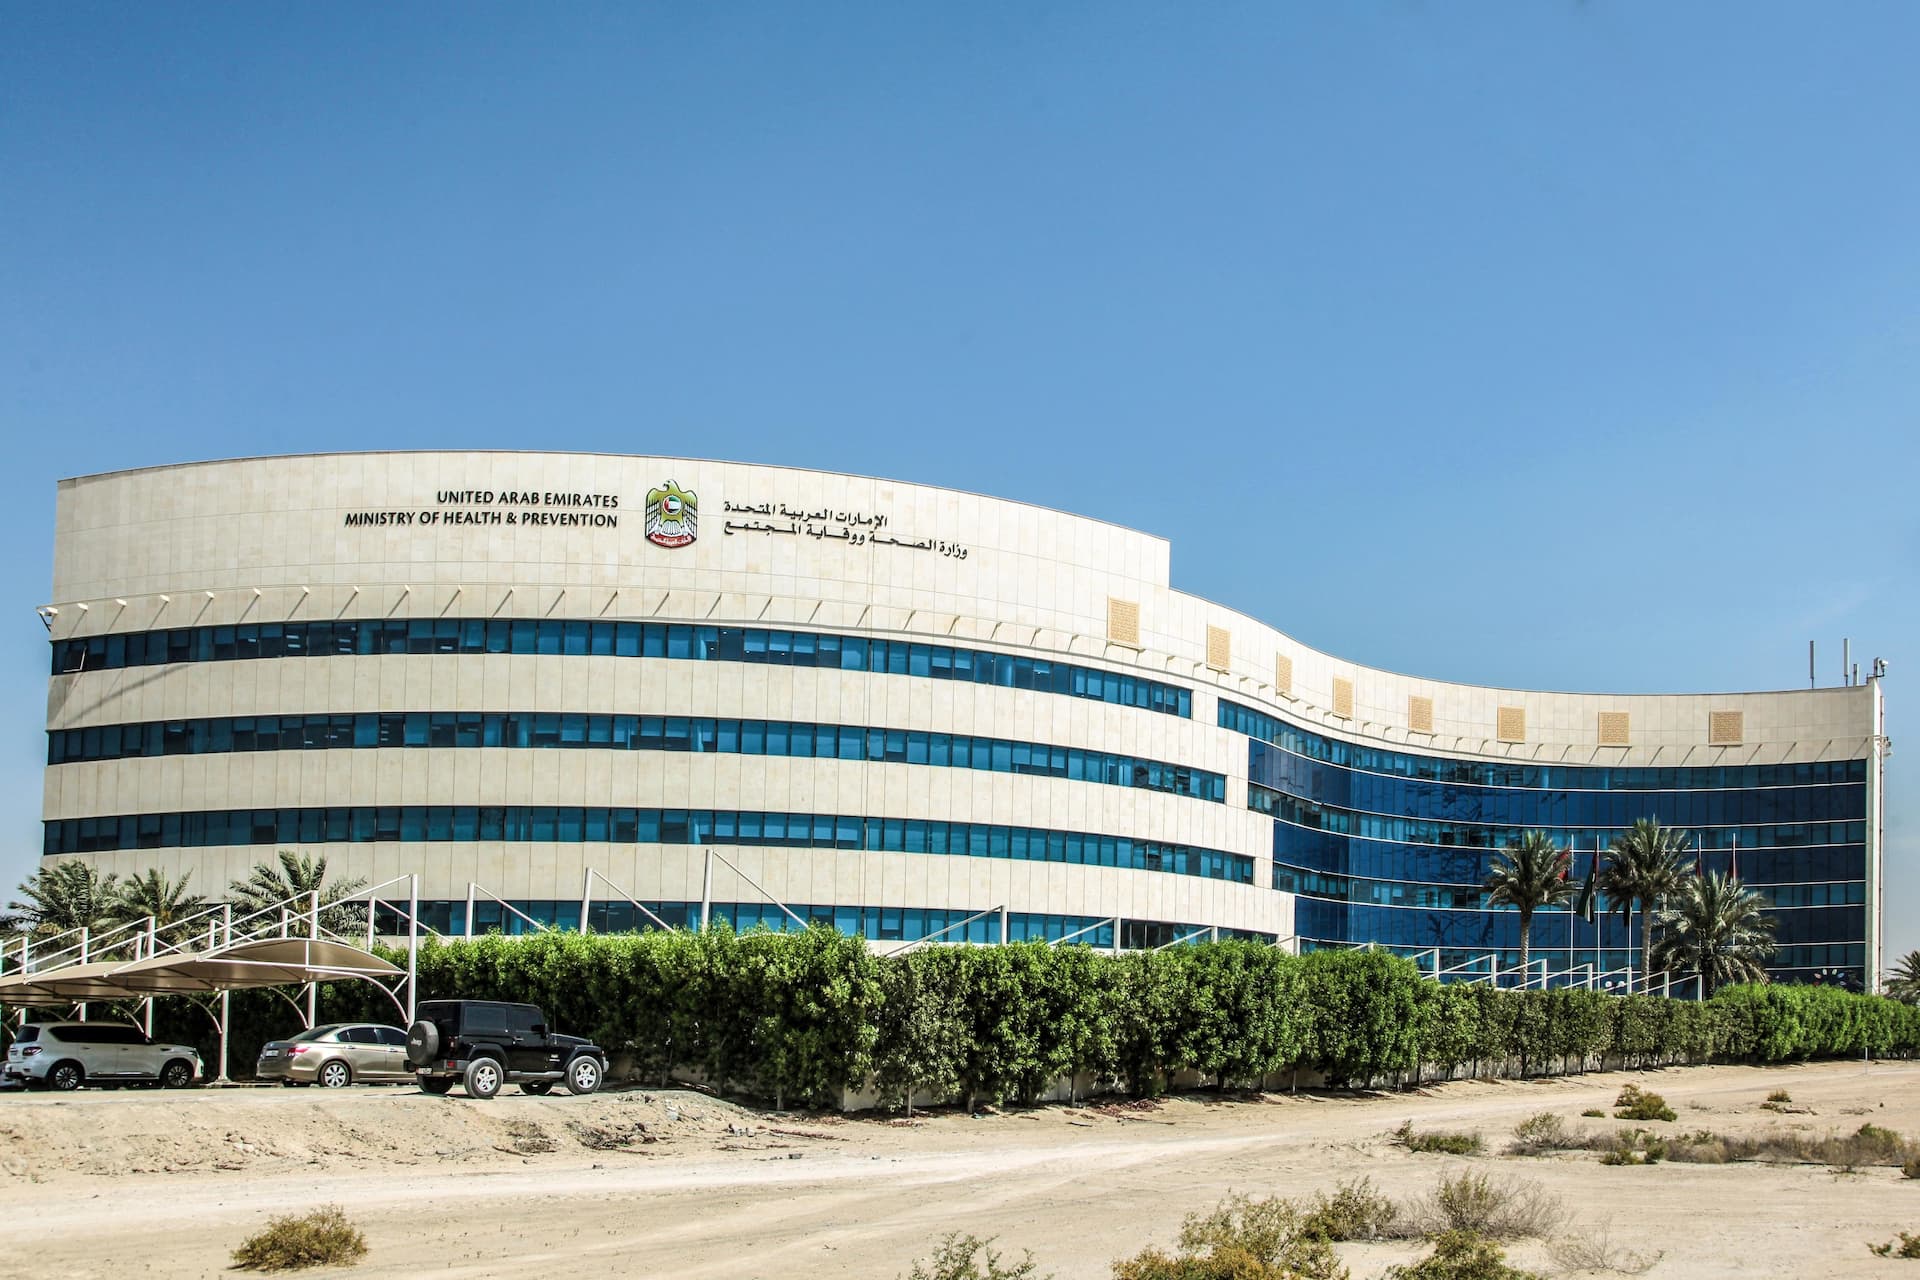 Two new services launched by the UAE health ministry